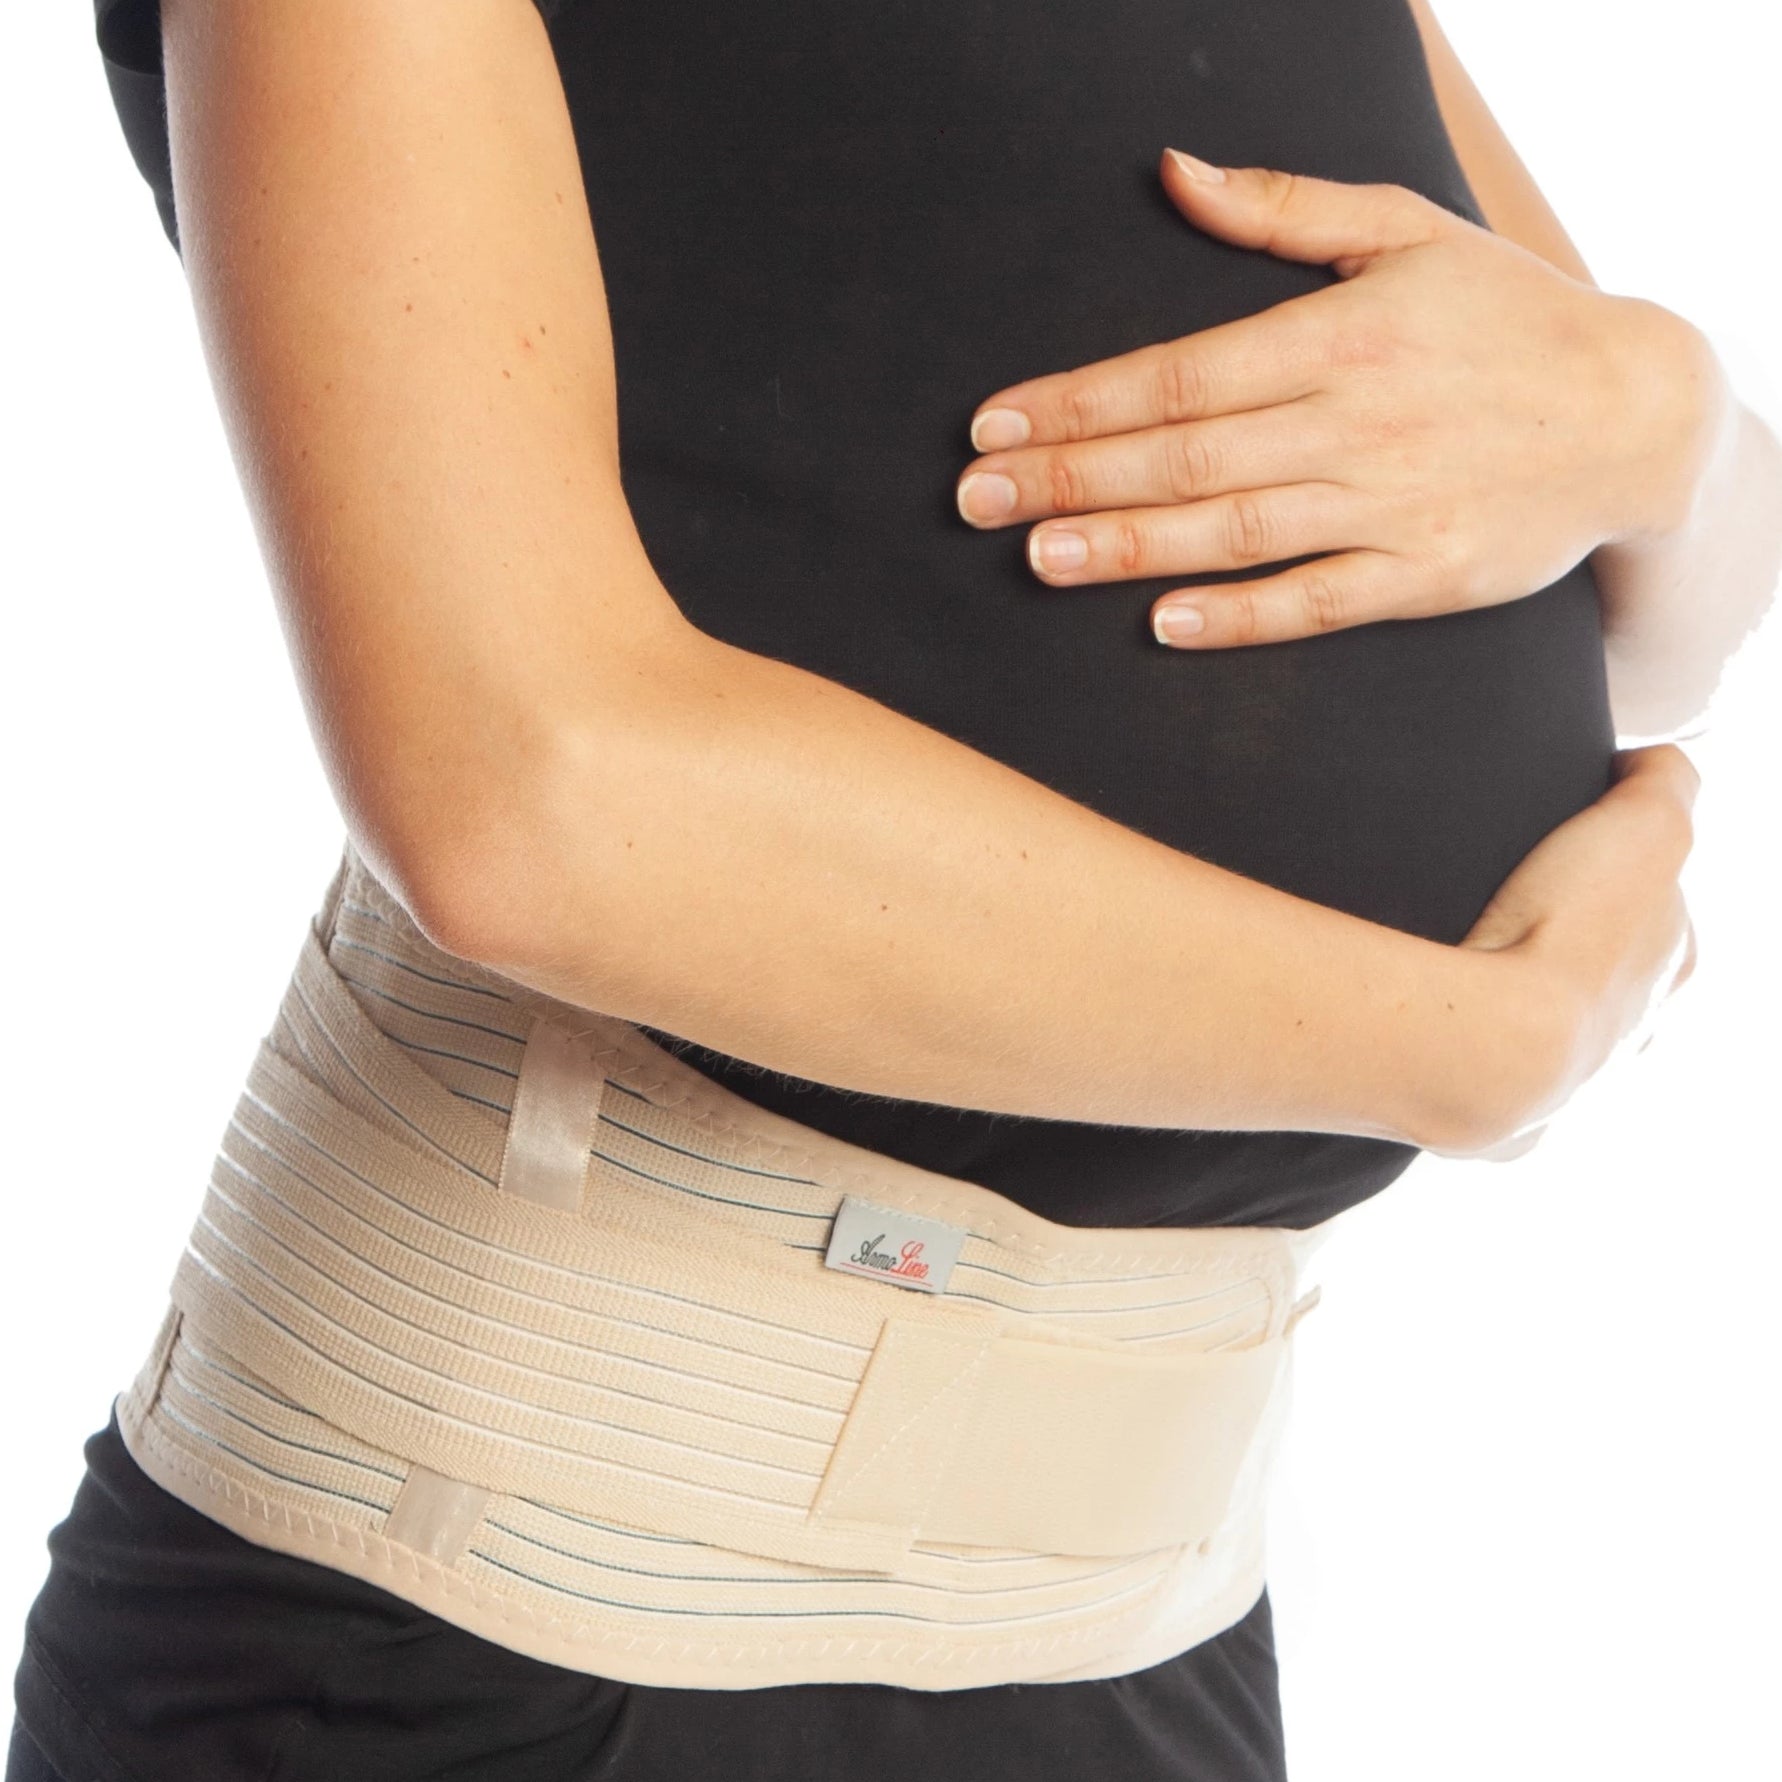 Abdominal Support Binder for Hysterectomy